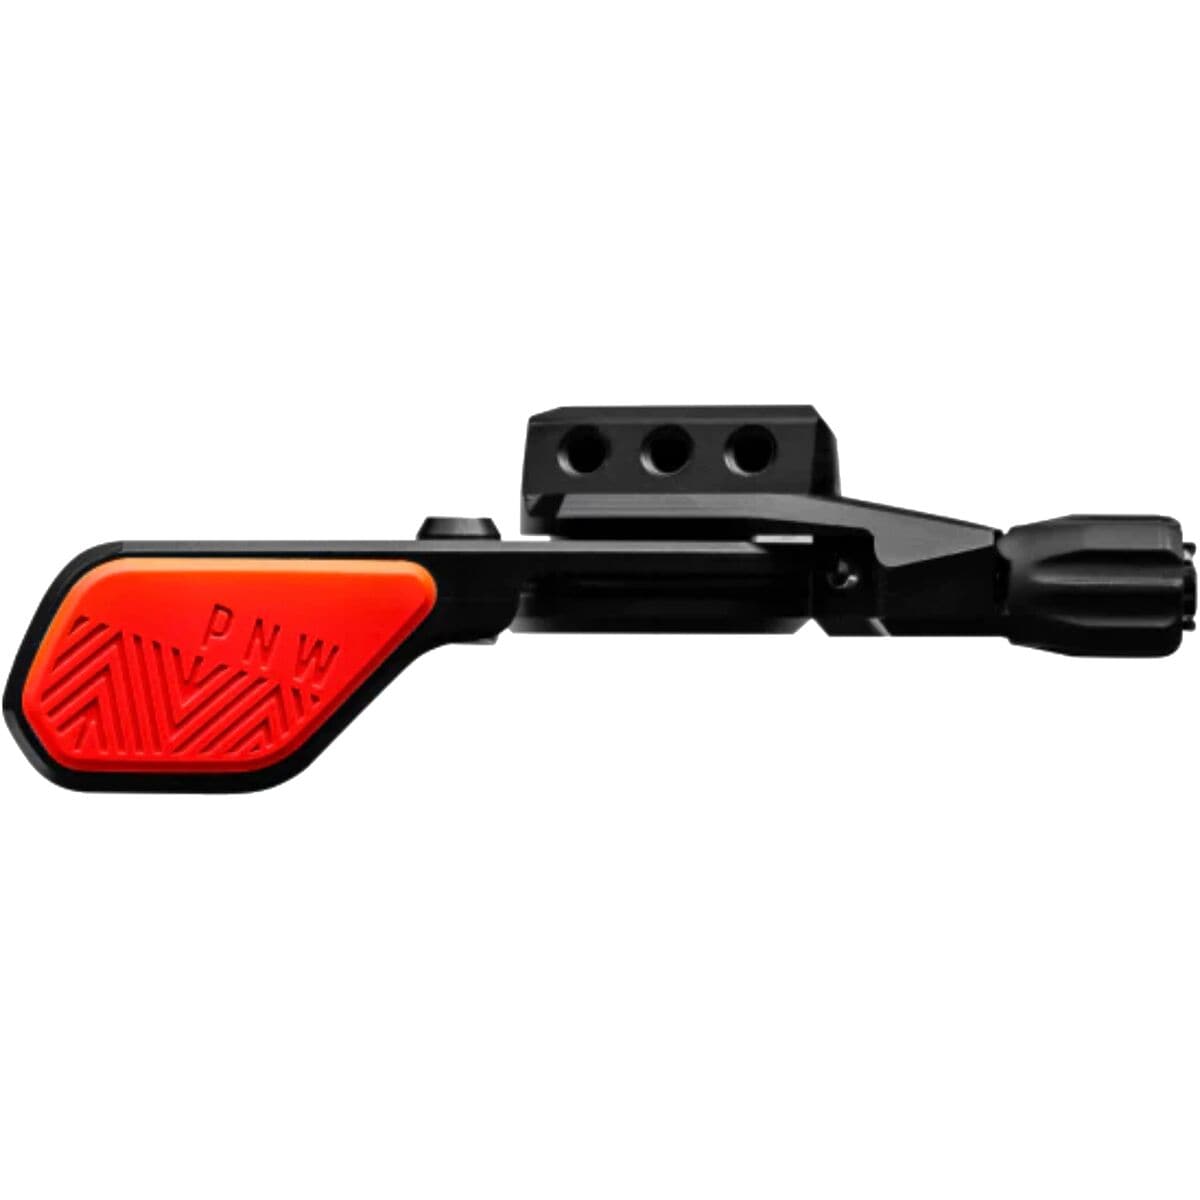 PNW Components Loam Lever 2 Black/Red, 22.2 Clamp